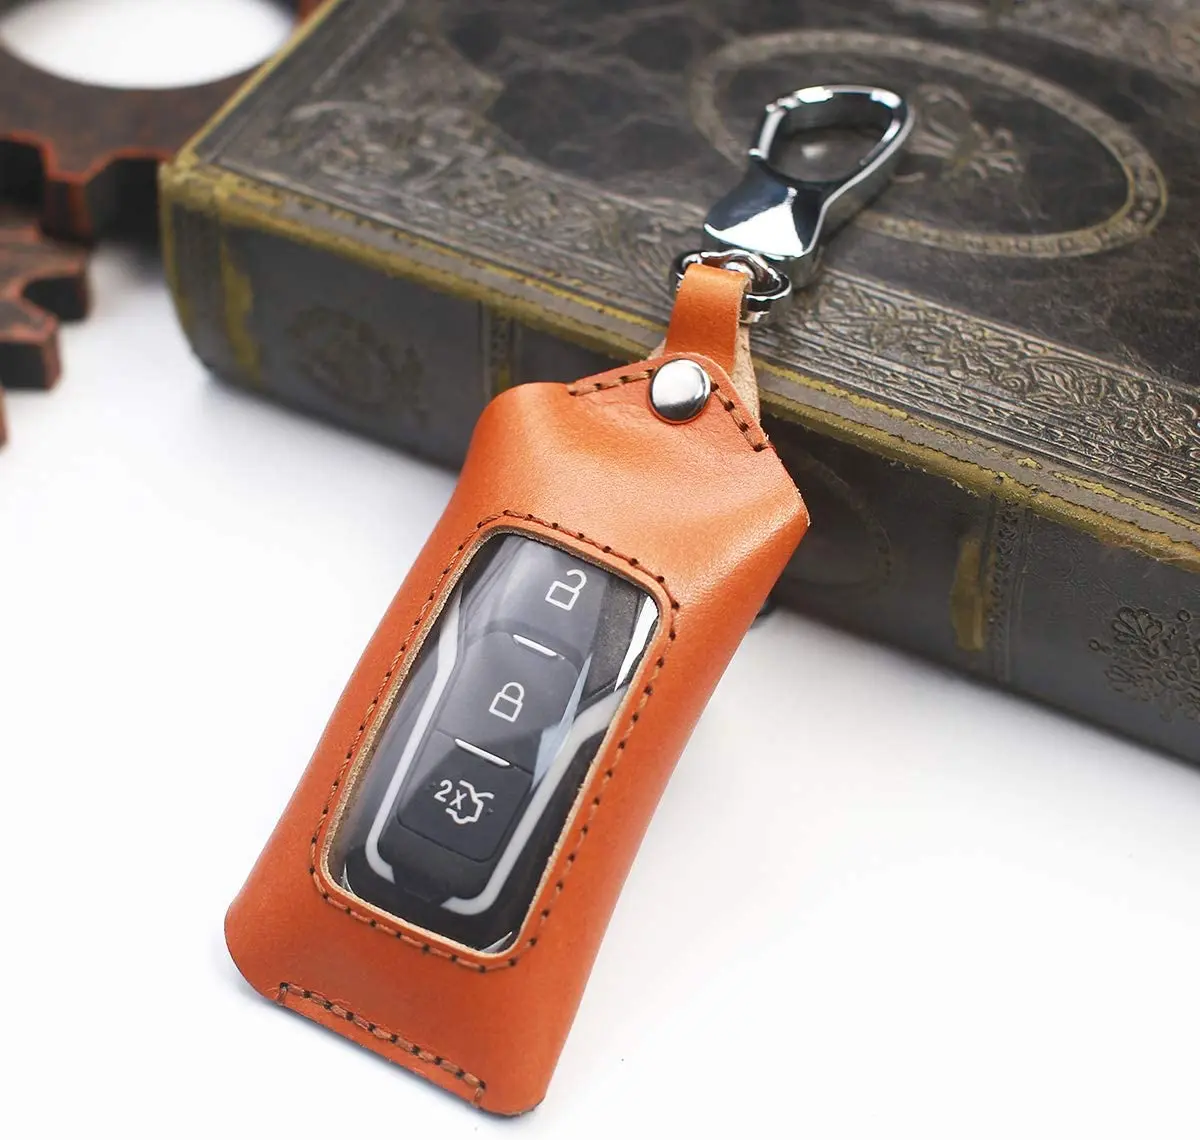 Easyant universal leather key chain protective cover with transparent windows car key bag hook key chain Brown 3 in 1 semi rigid usb endoscope camera 5 5mm ip67 waterproof snake camera with 6 led for windows